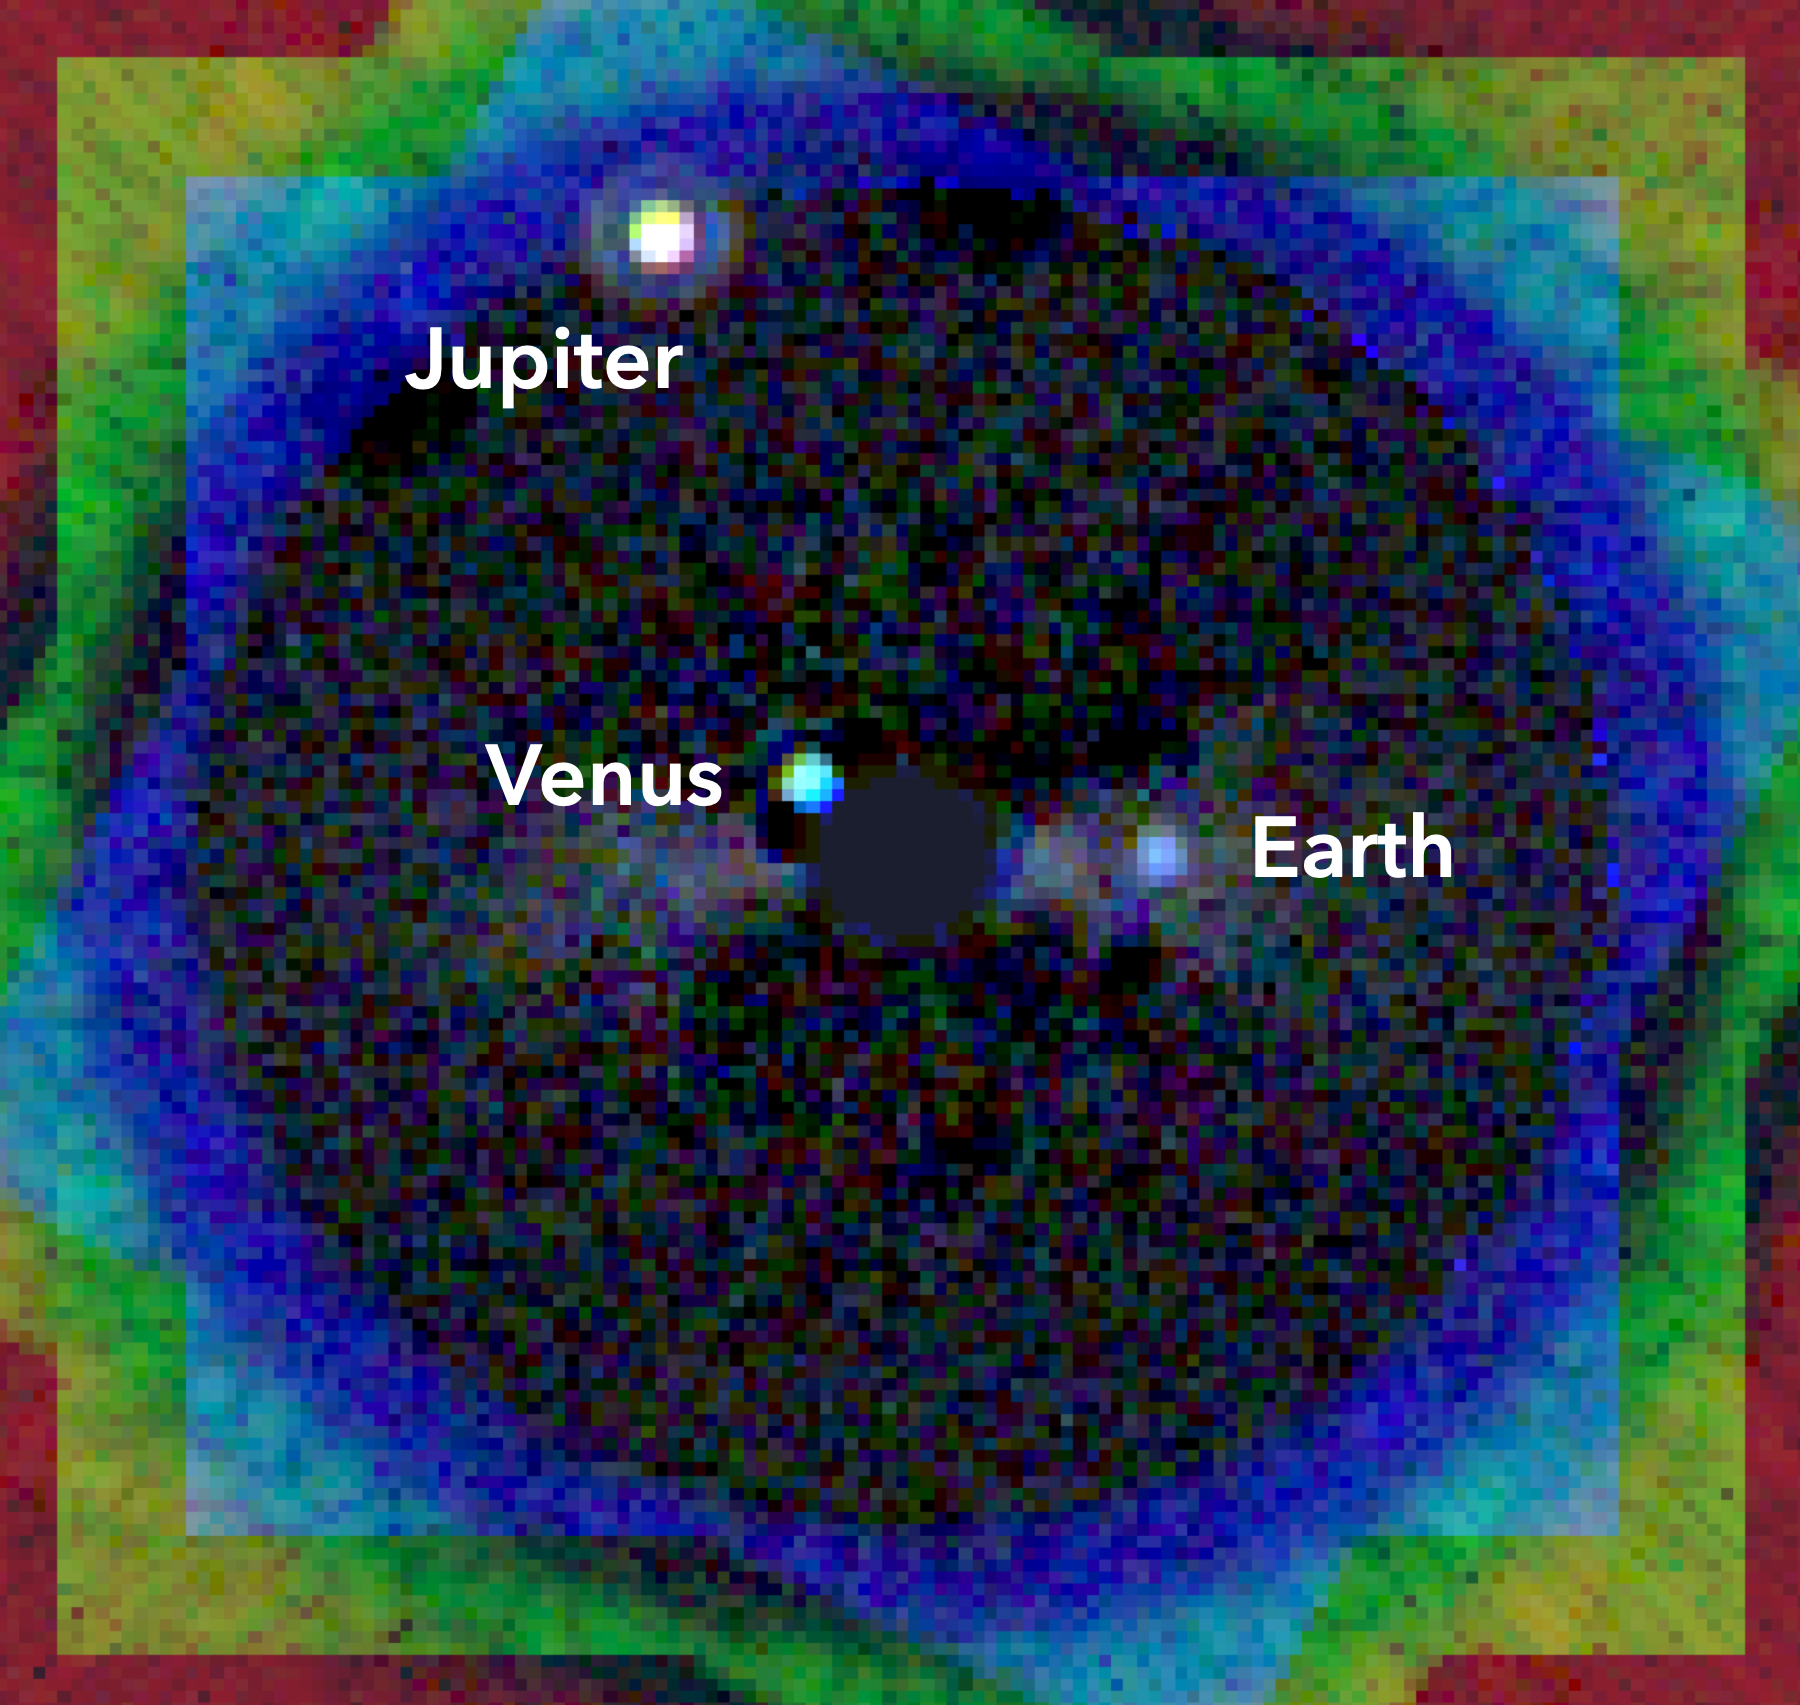 Modern Solar System observed with the ECLIPS coronagraph on the LUVOIR mission concept.